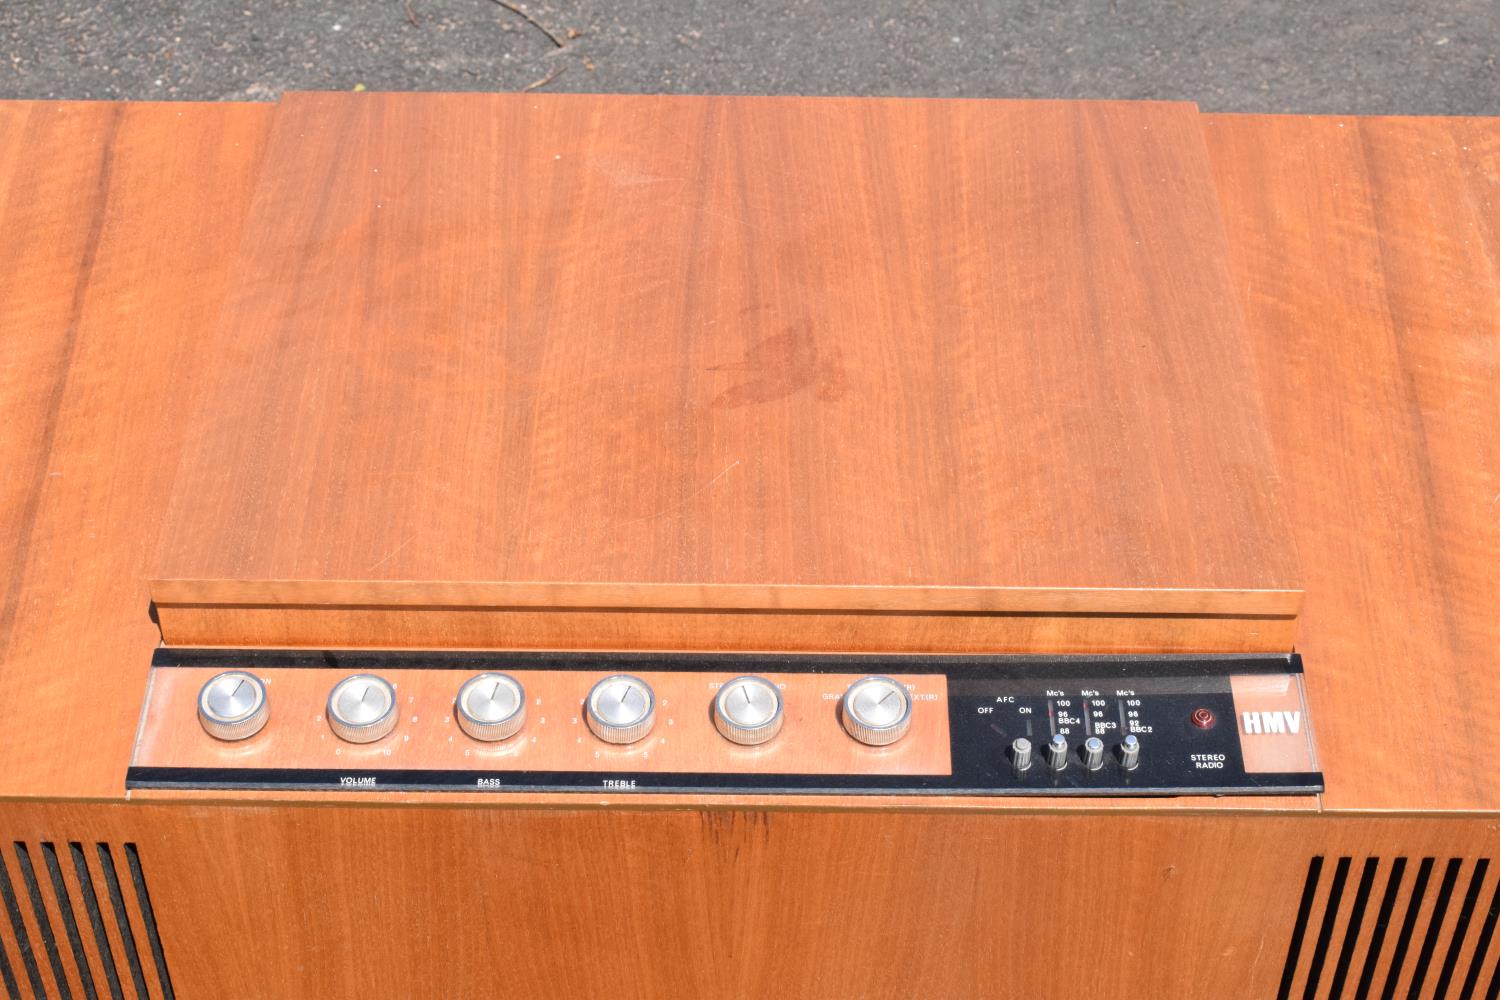 HMV teak radiogram unit. 96 x 44 x 60cm. In good condition with signs of age-related wear and - Image 2 of 6